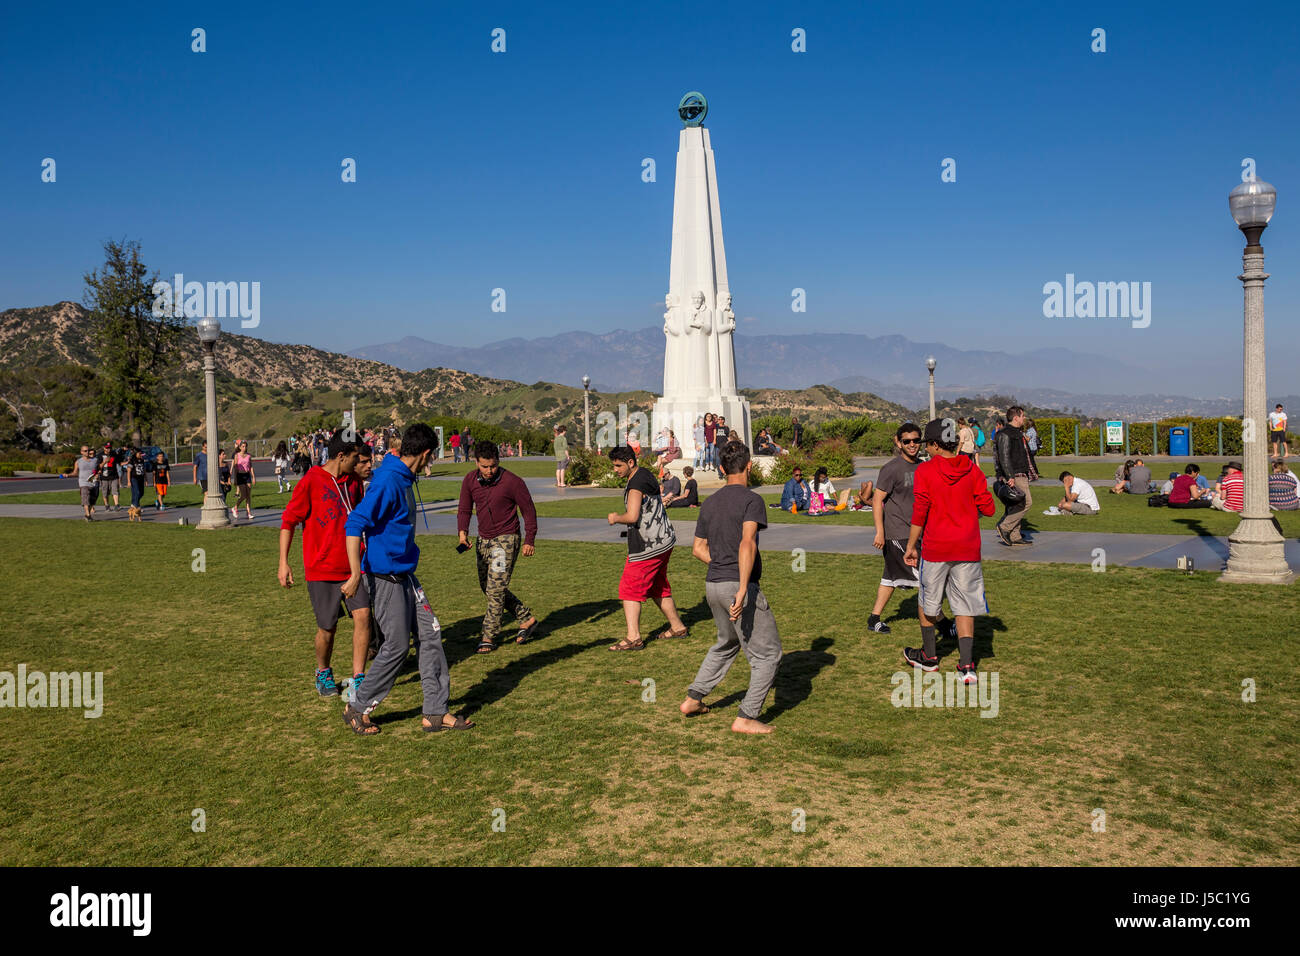 people, tourists, dancing, ethnic dance, lawn, observatory grounds, Astronomers Monument, Griffith Observatory, Griffith Park, Los Angeles, California Stock Photo